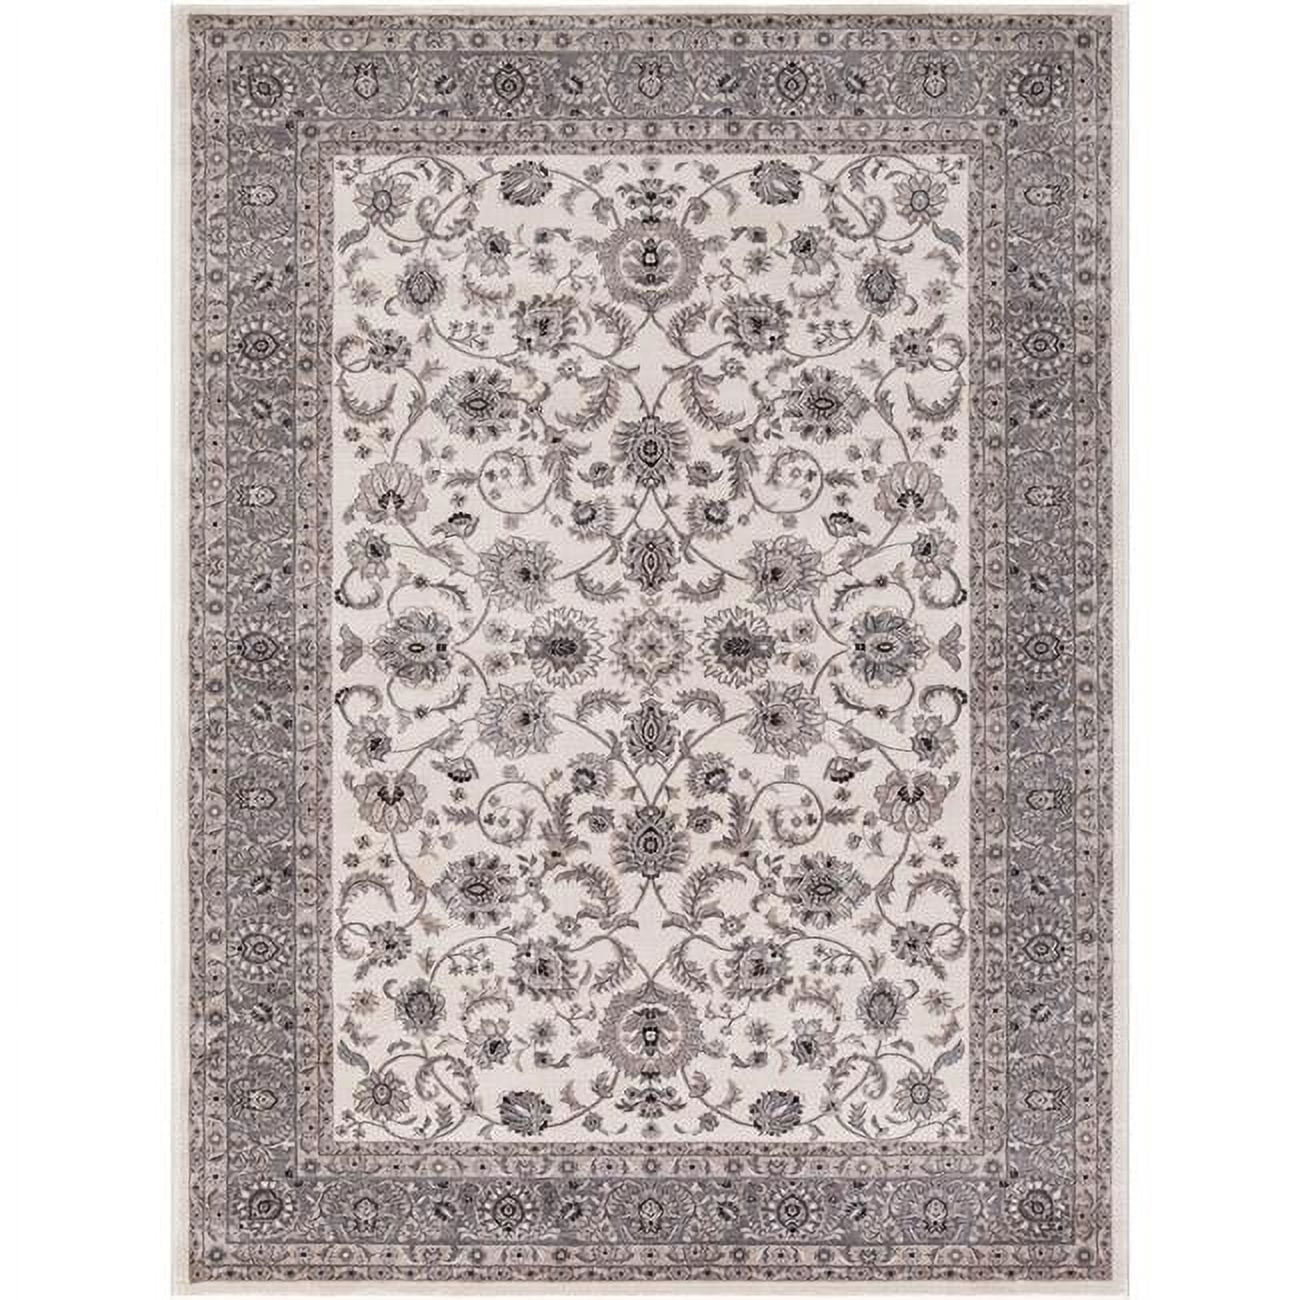 Picture of Concord Global 28215 5 ft. 3 in. x 7 ft. 3 in. Kashan Mahal - Beige